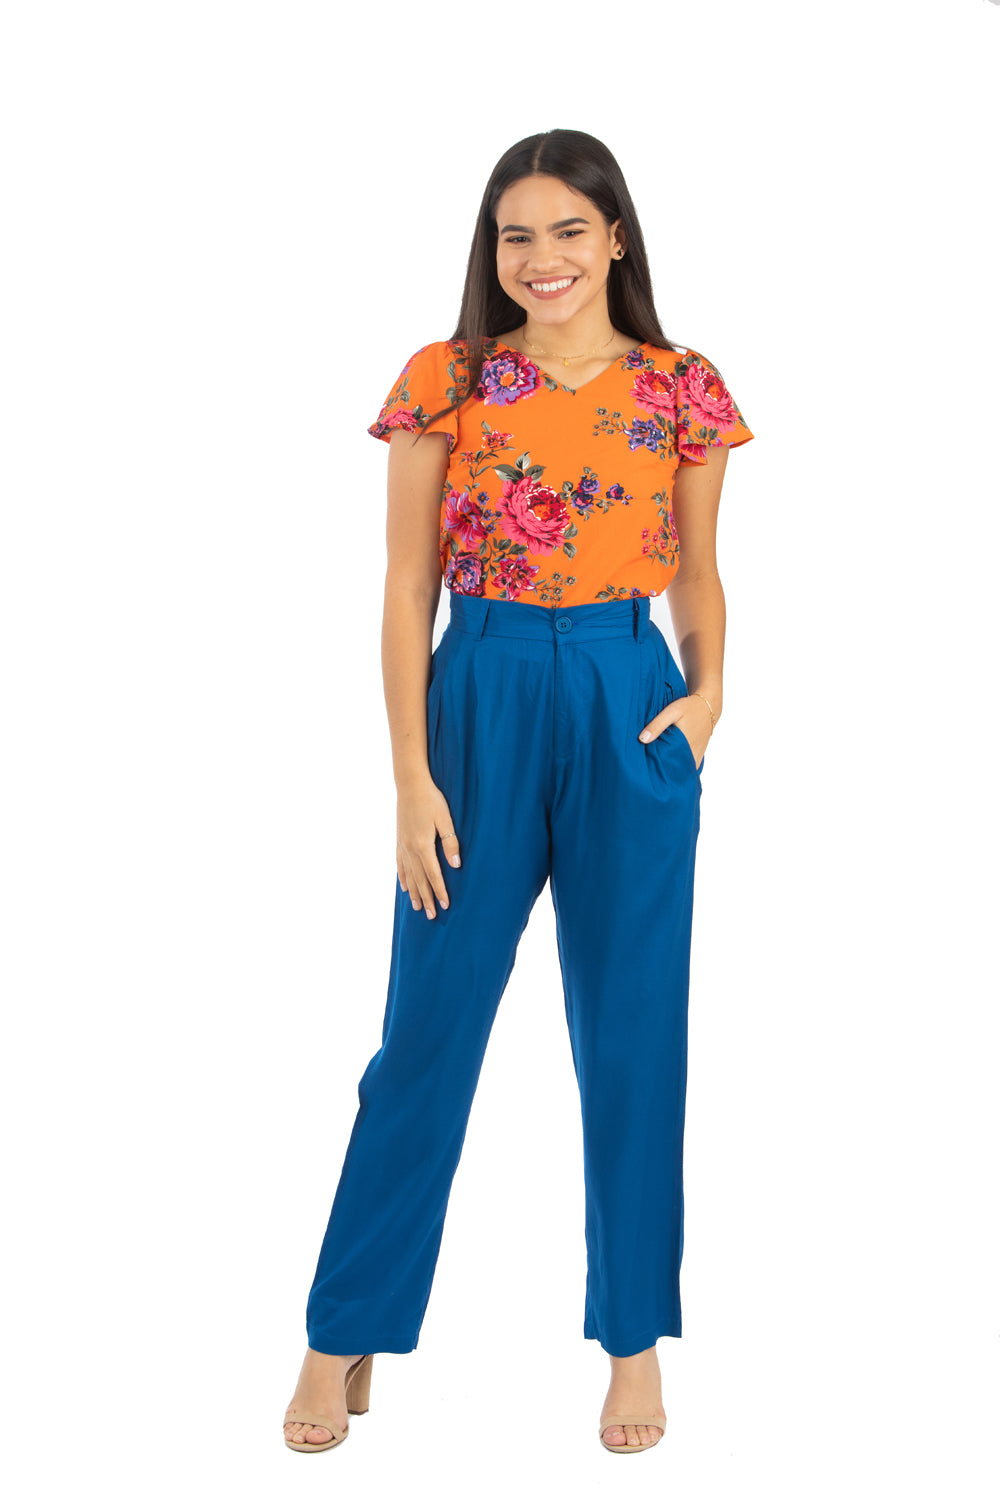 The color of the Flowers Top | NR-371